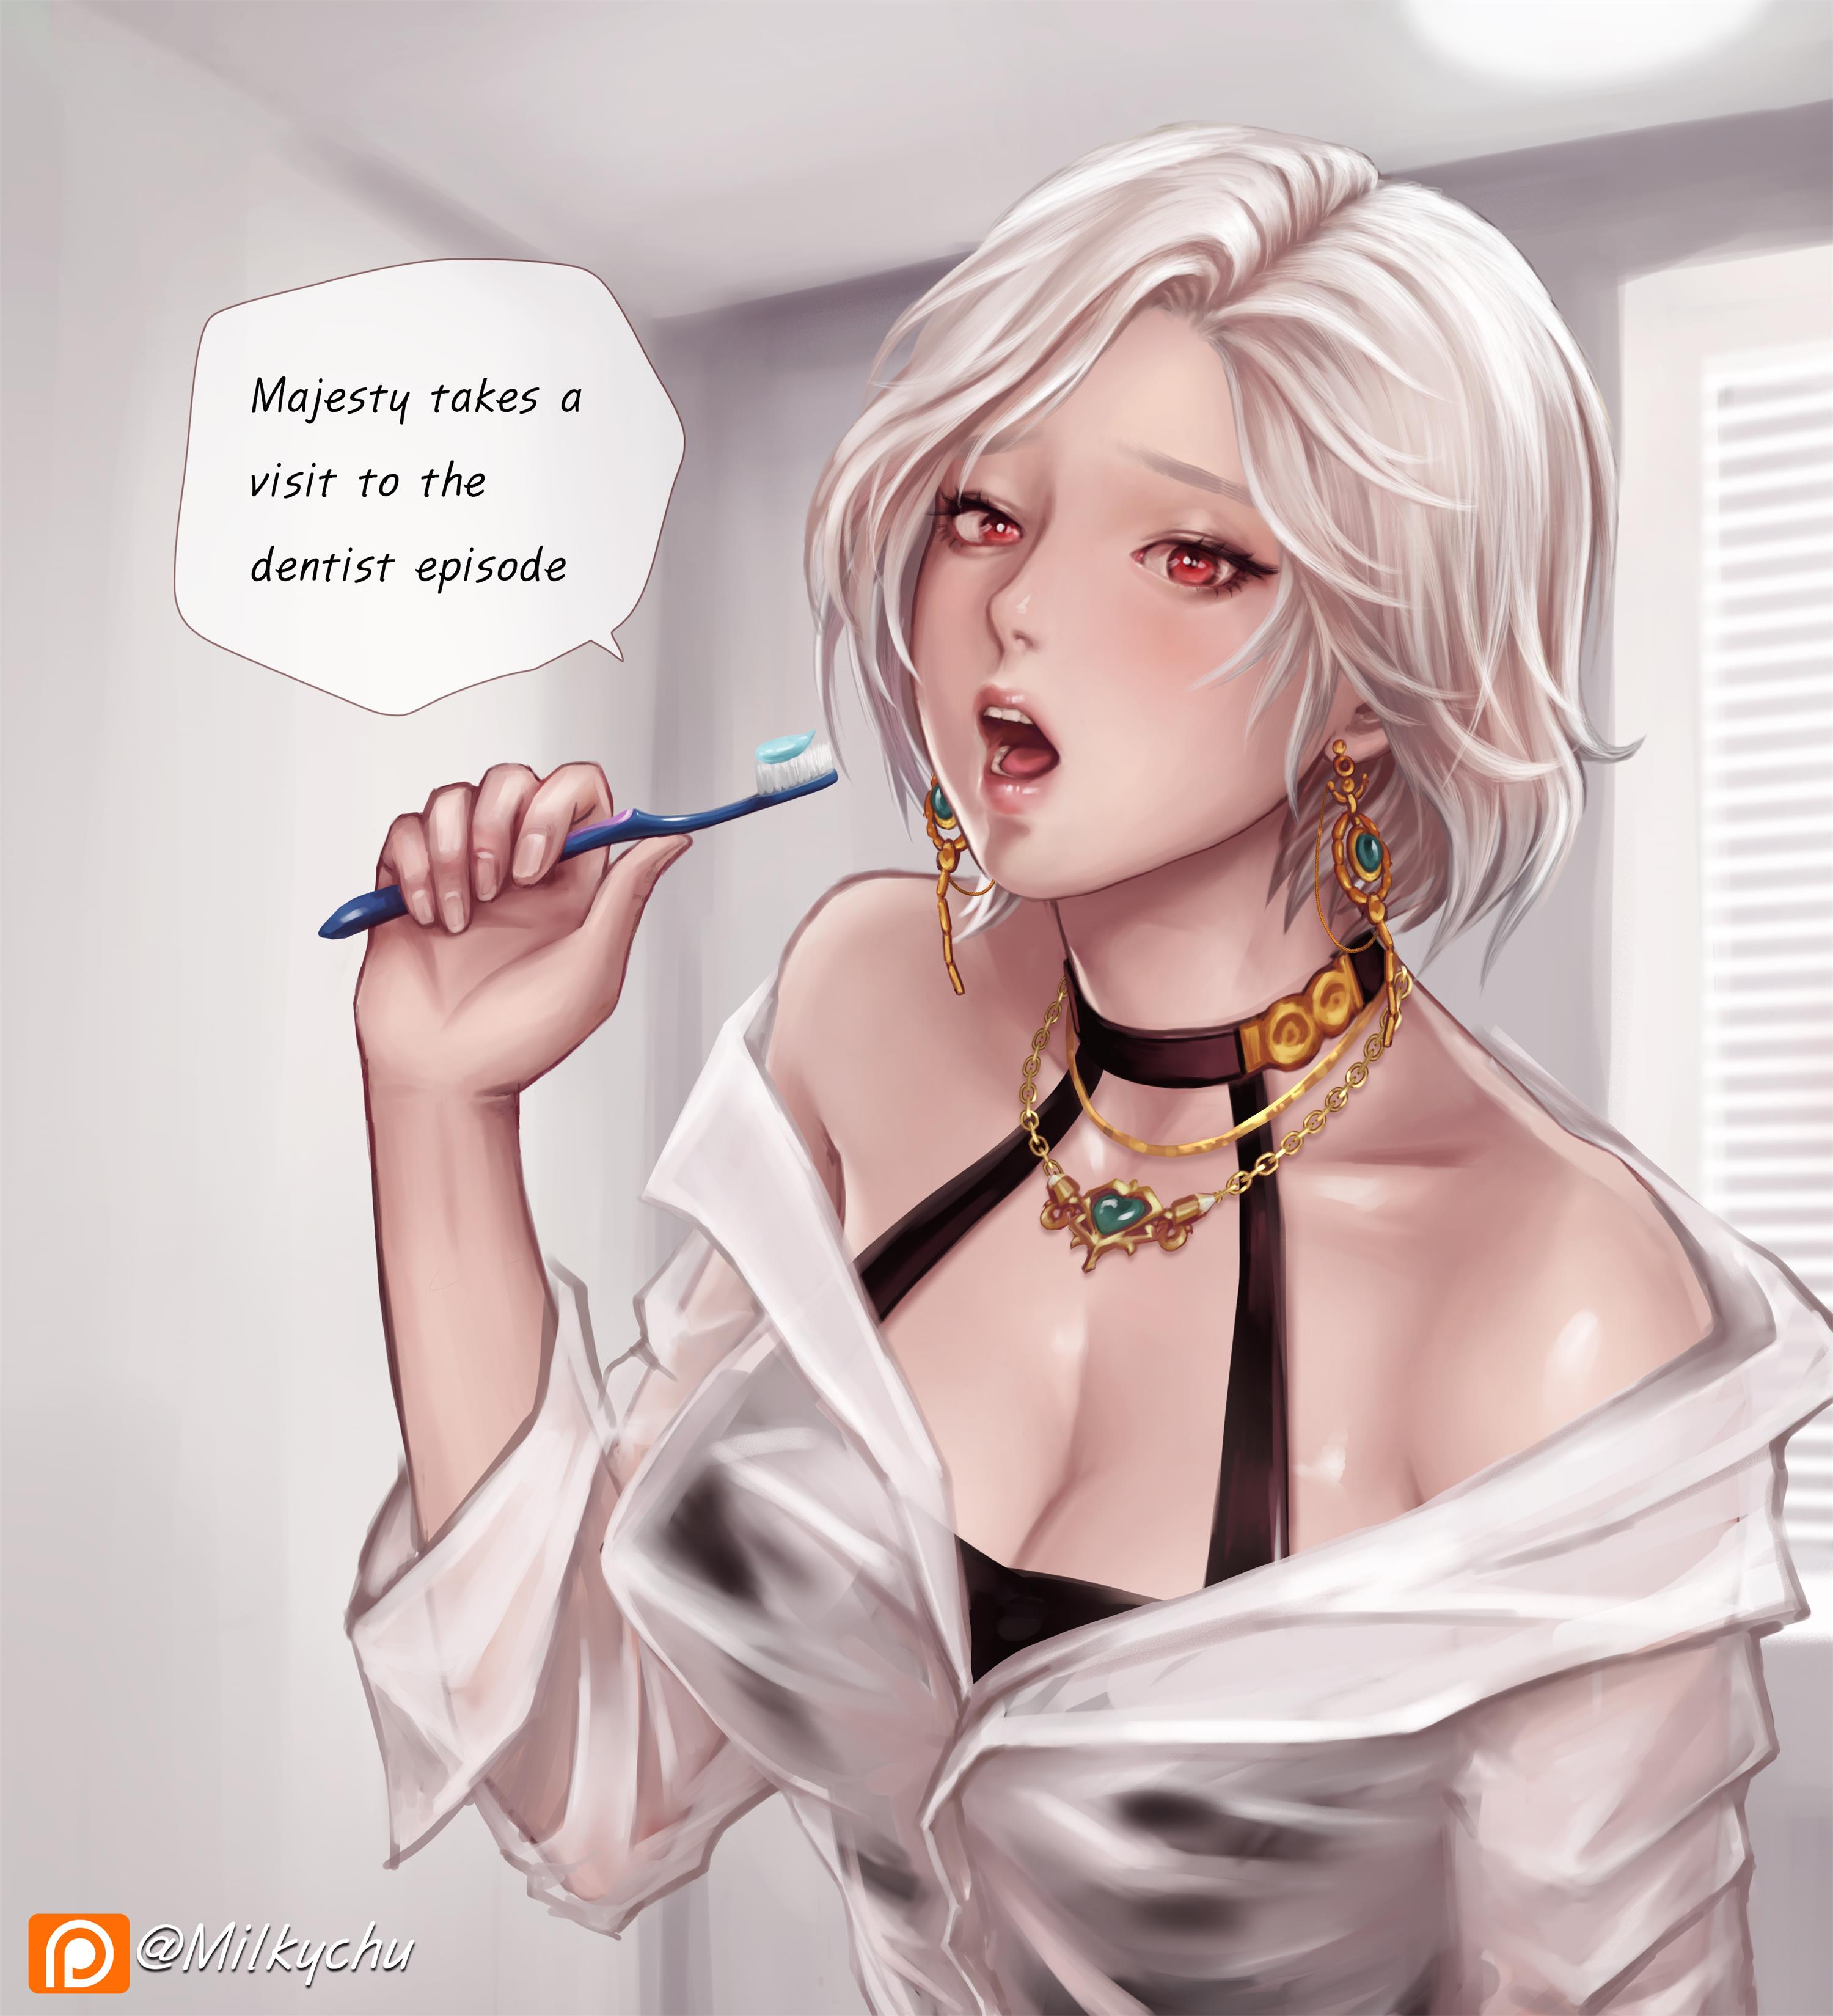 Anime 3000x3299 Milkychu white hair red eyes toothbrush long earrings necklace see-through shirt cleavage speech bubble women